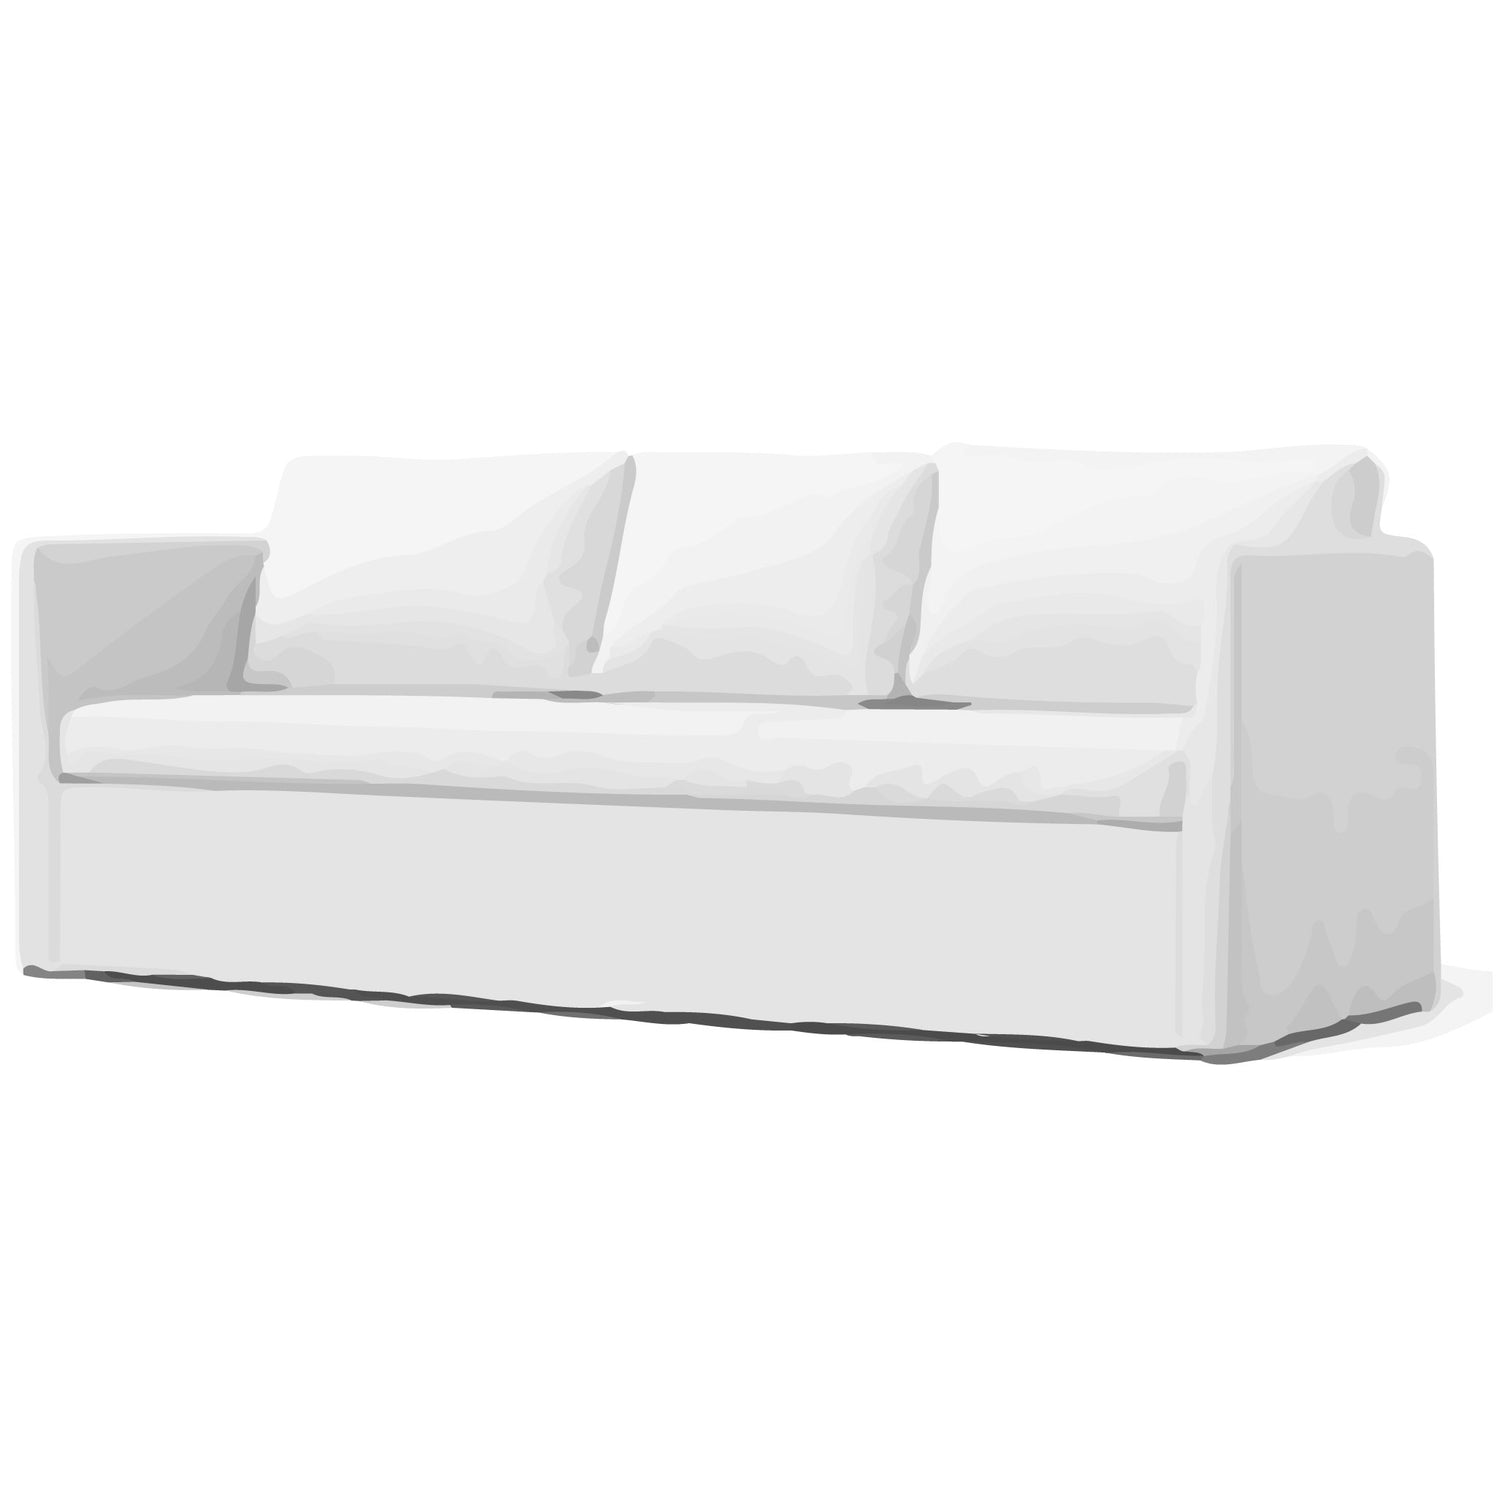 mattress In need of Dent Brathult 3 Seater Sofa Cover – The Styled Sofa